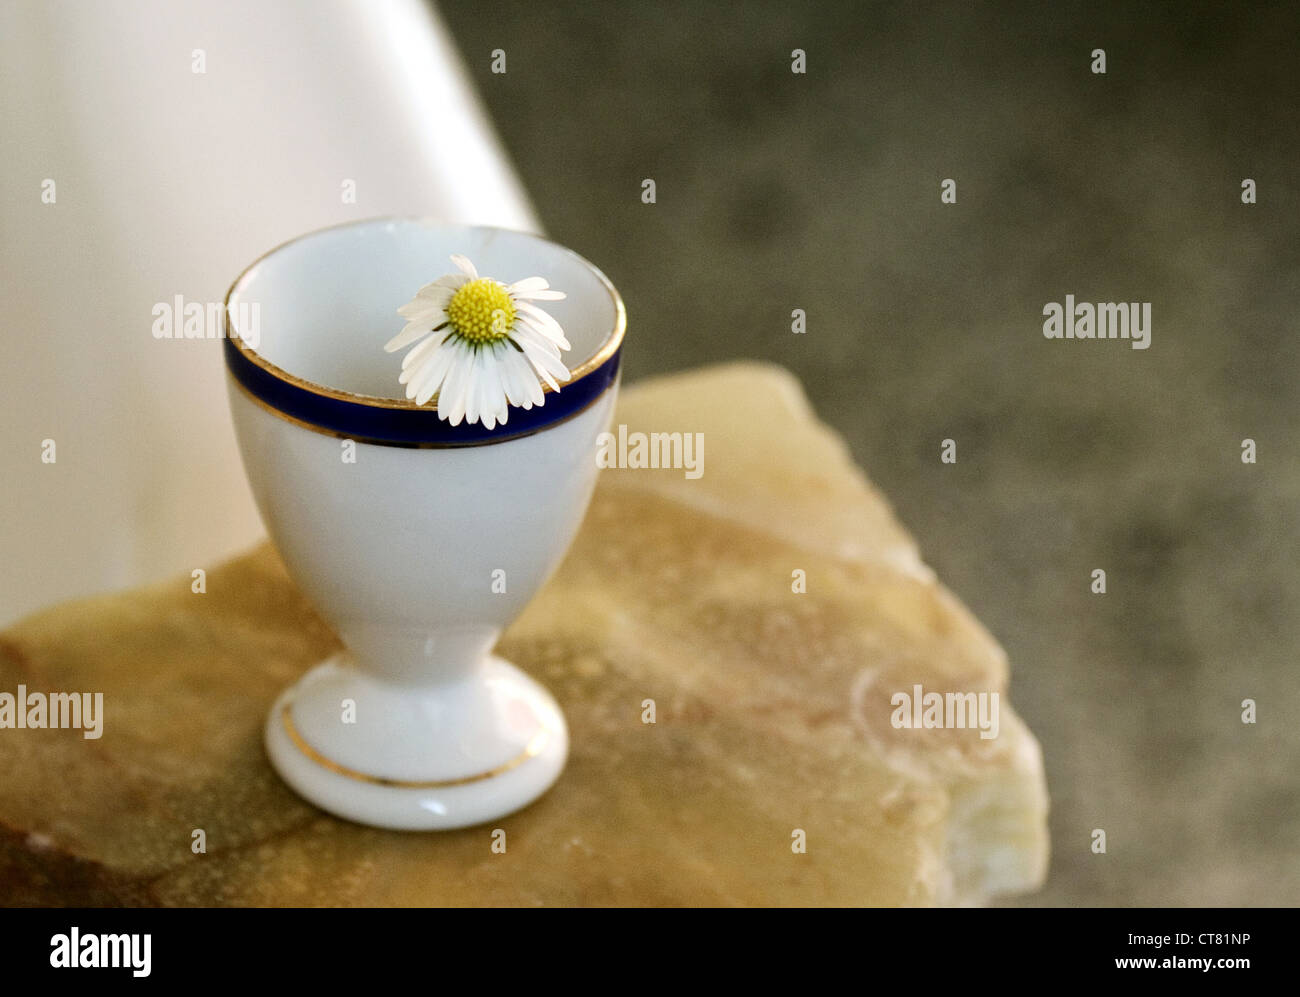 Berlin flower in an egg cup Stock Photo